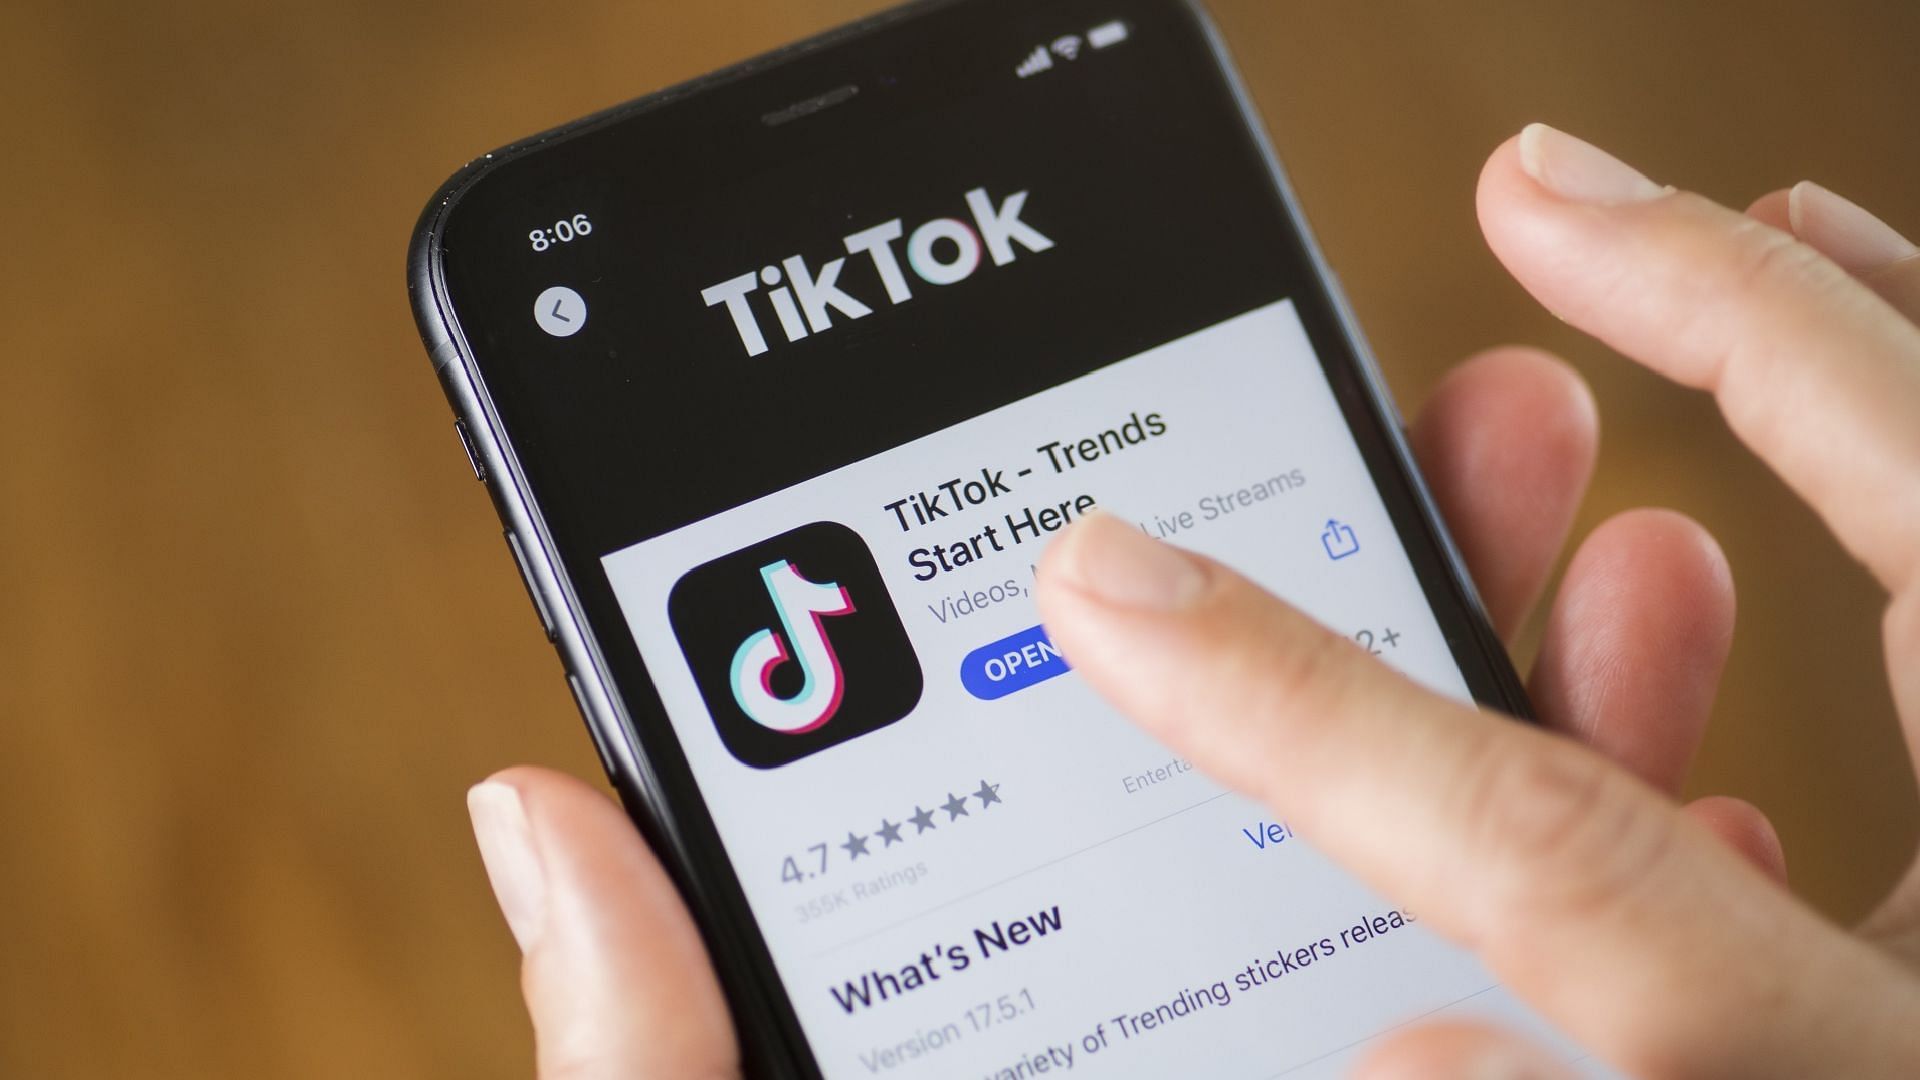 10 TikTok slangs you should absolutely know (Image via Brent Lewin/Bloomberg via Getty Images)